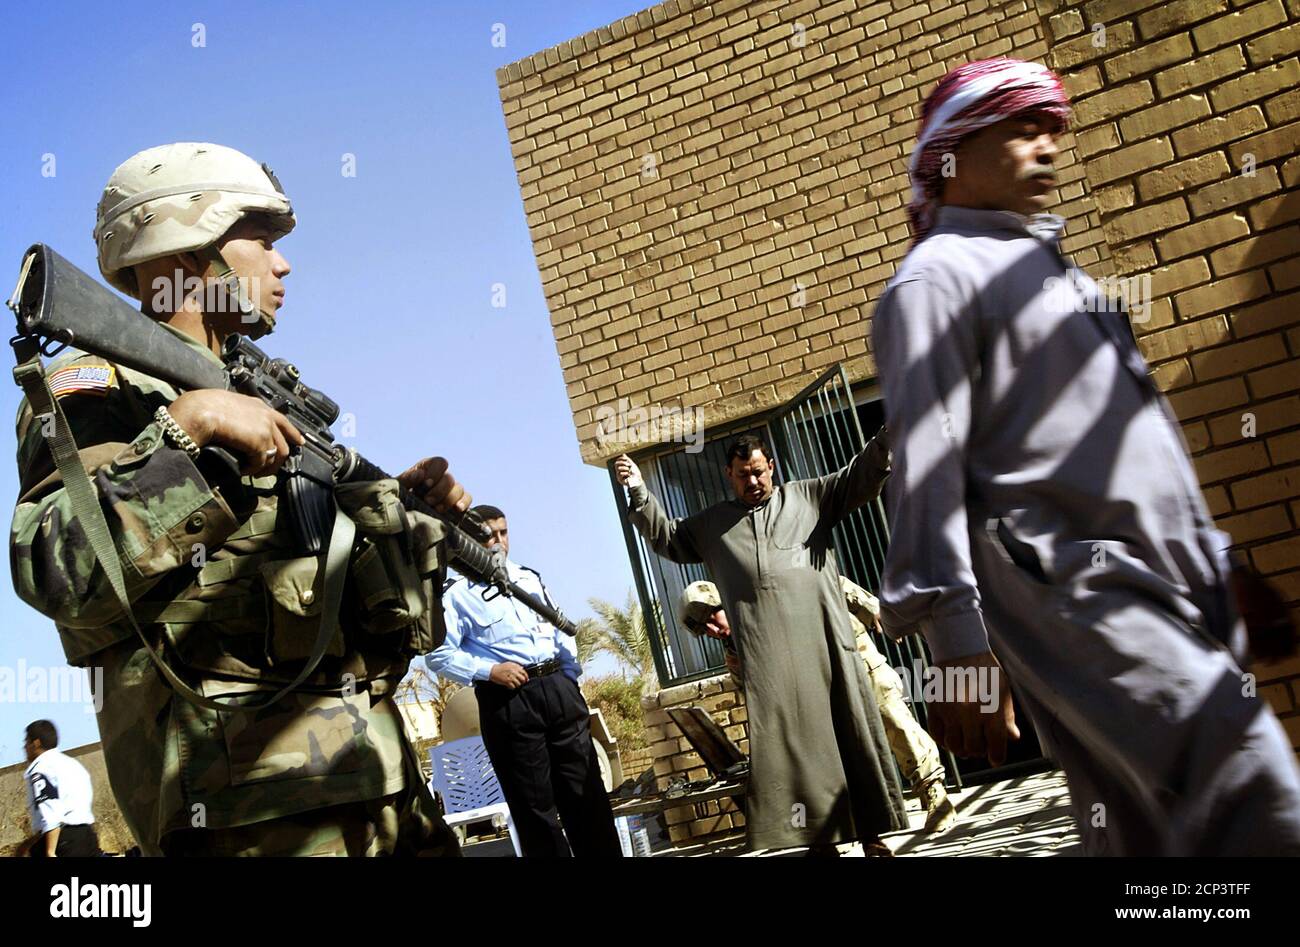 Iraqi men are searched by U.S. troops at the entrance of a police station as they wait for new identity cards to be issued in al Awja, a village outside Tikrit, 110 miles north of Baghdad, November 1, 2003. U.S. Army's 4th Infantry Division (Task Force Ironhorse) continued for the second day stepping up security in the village of al Awja where former Iraqi president Saddam Hussein was born, setting up check points, patroling with members of Iraqi Civil Defense Corps (ICDC), limiting movement with razor wire and issuing identity cards to adults that will allow them to move in and out of the vil Stock Photo